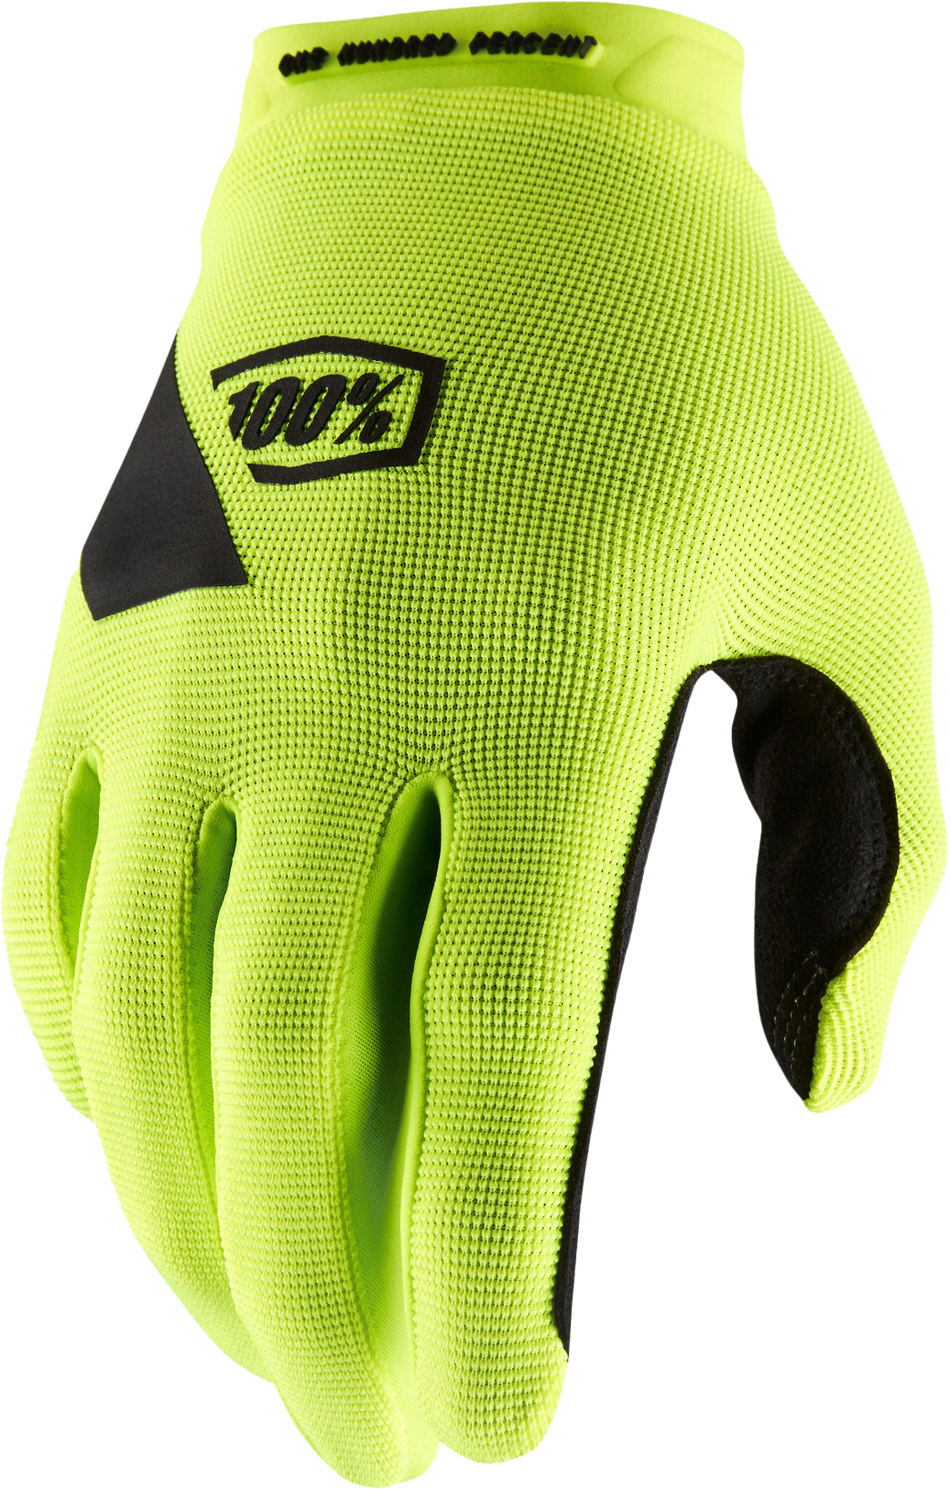 100% Ridecamp Gloves Fluo Yellow Sm 10011-00010